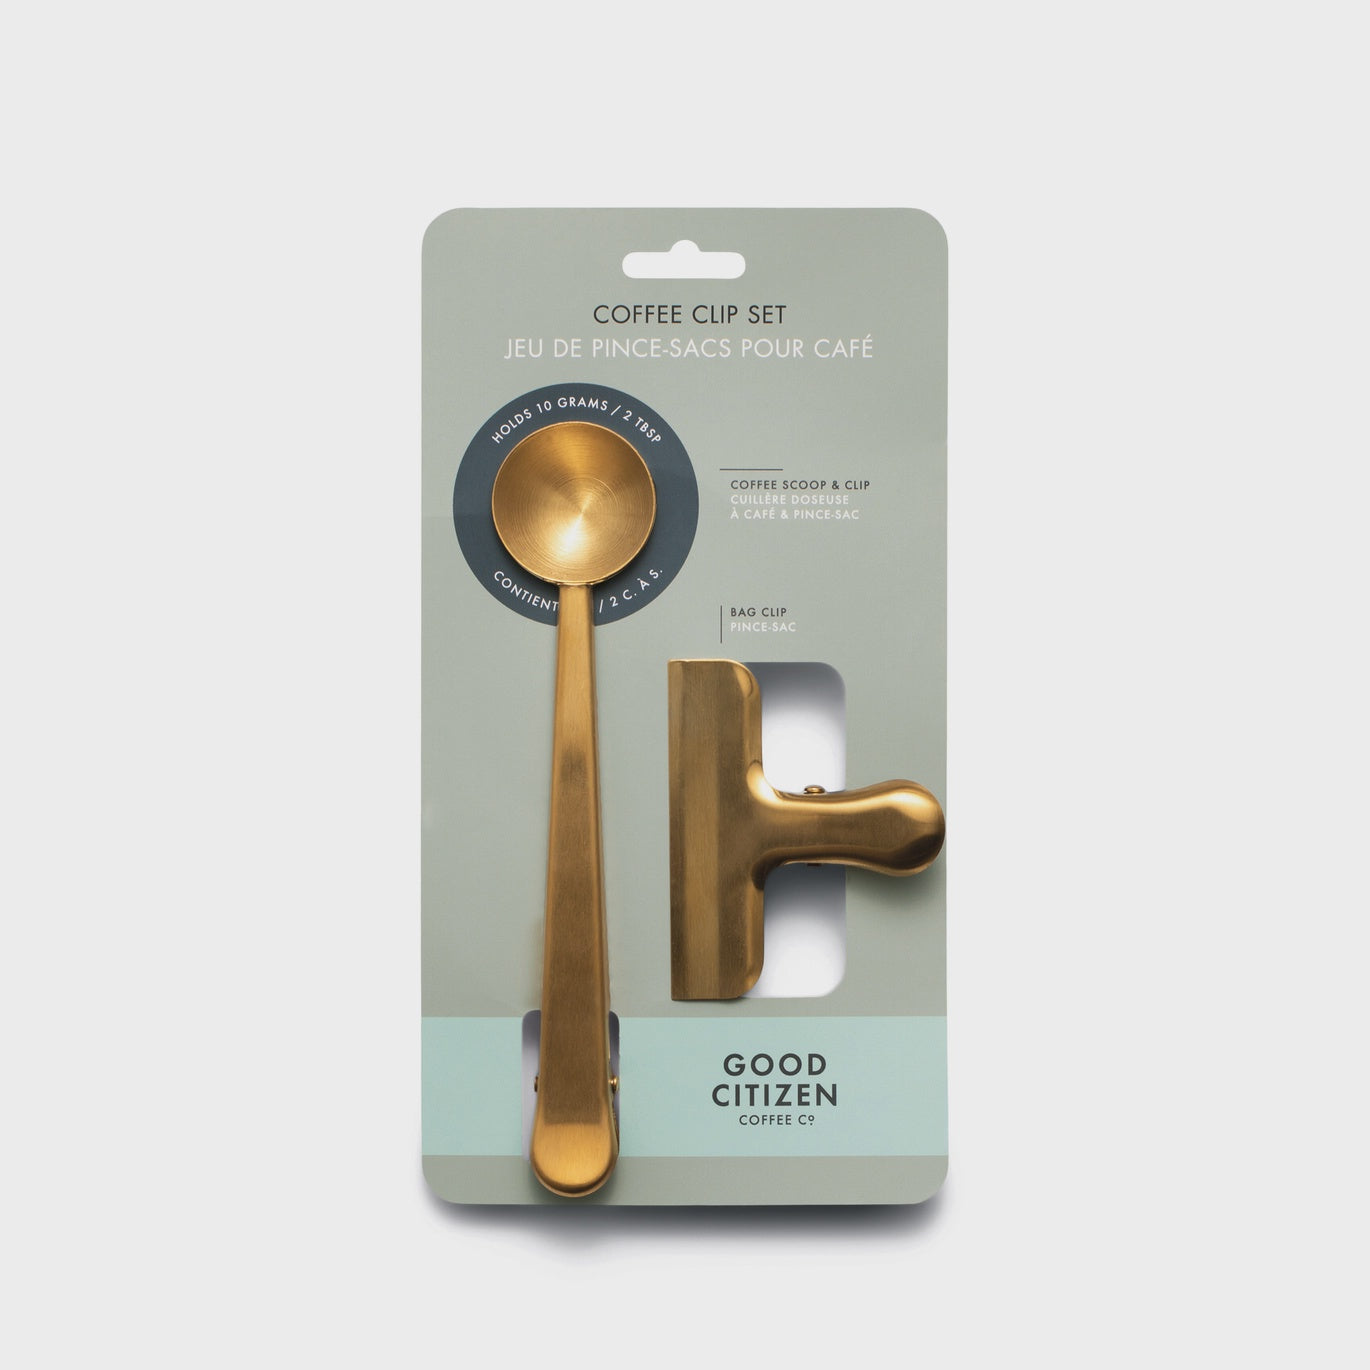 The Coffee Clip Set by Good Citizen